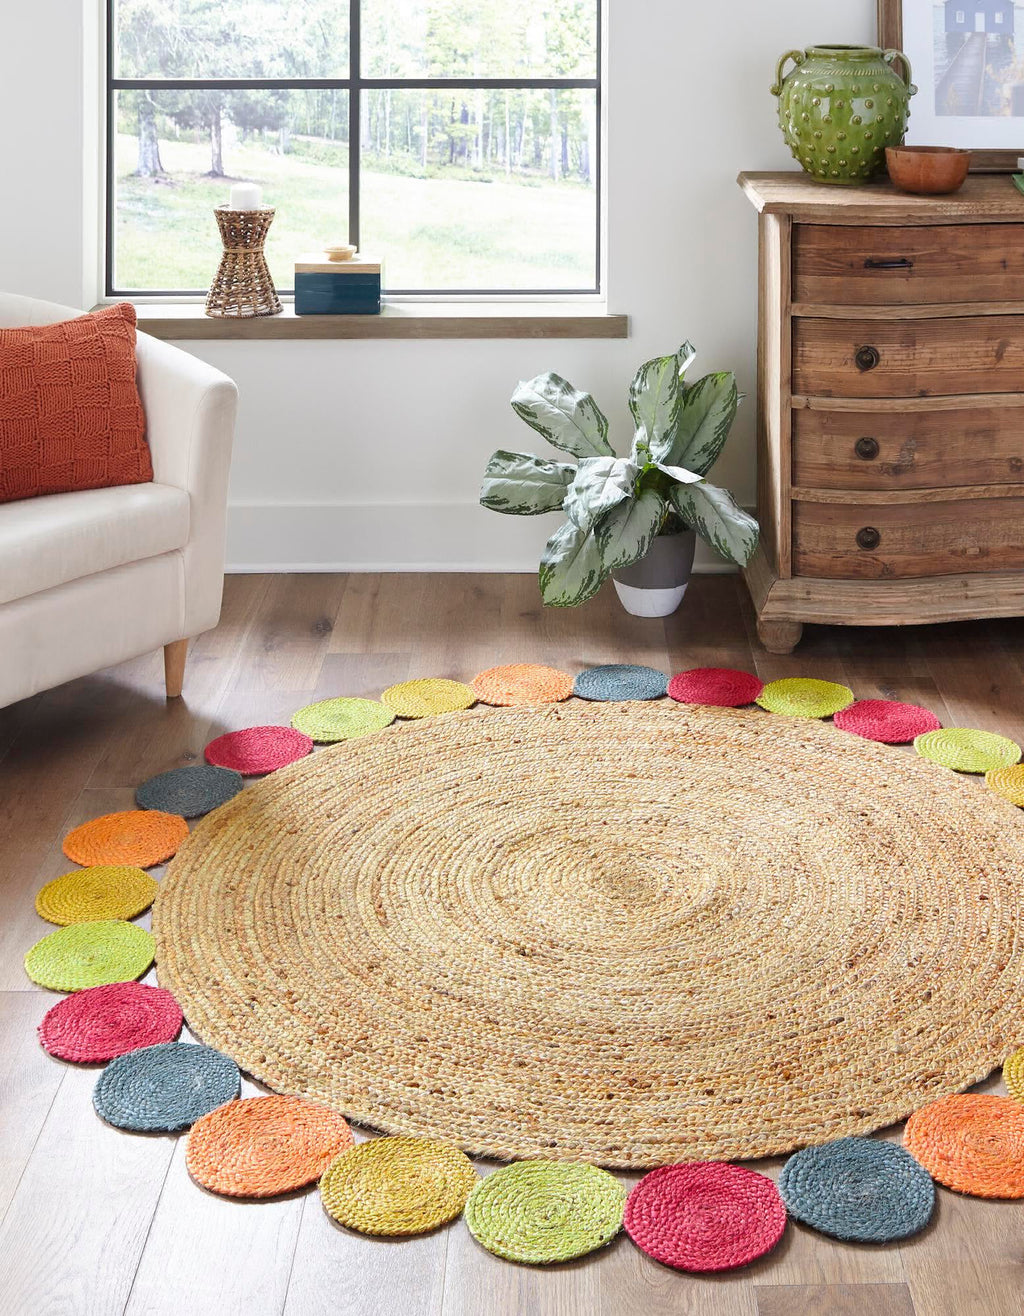 Unique Loom Braided Jute MGN-26 Natural Area Rug Round Lifestyle Image Feature